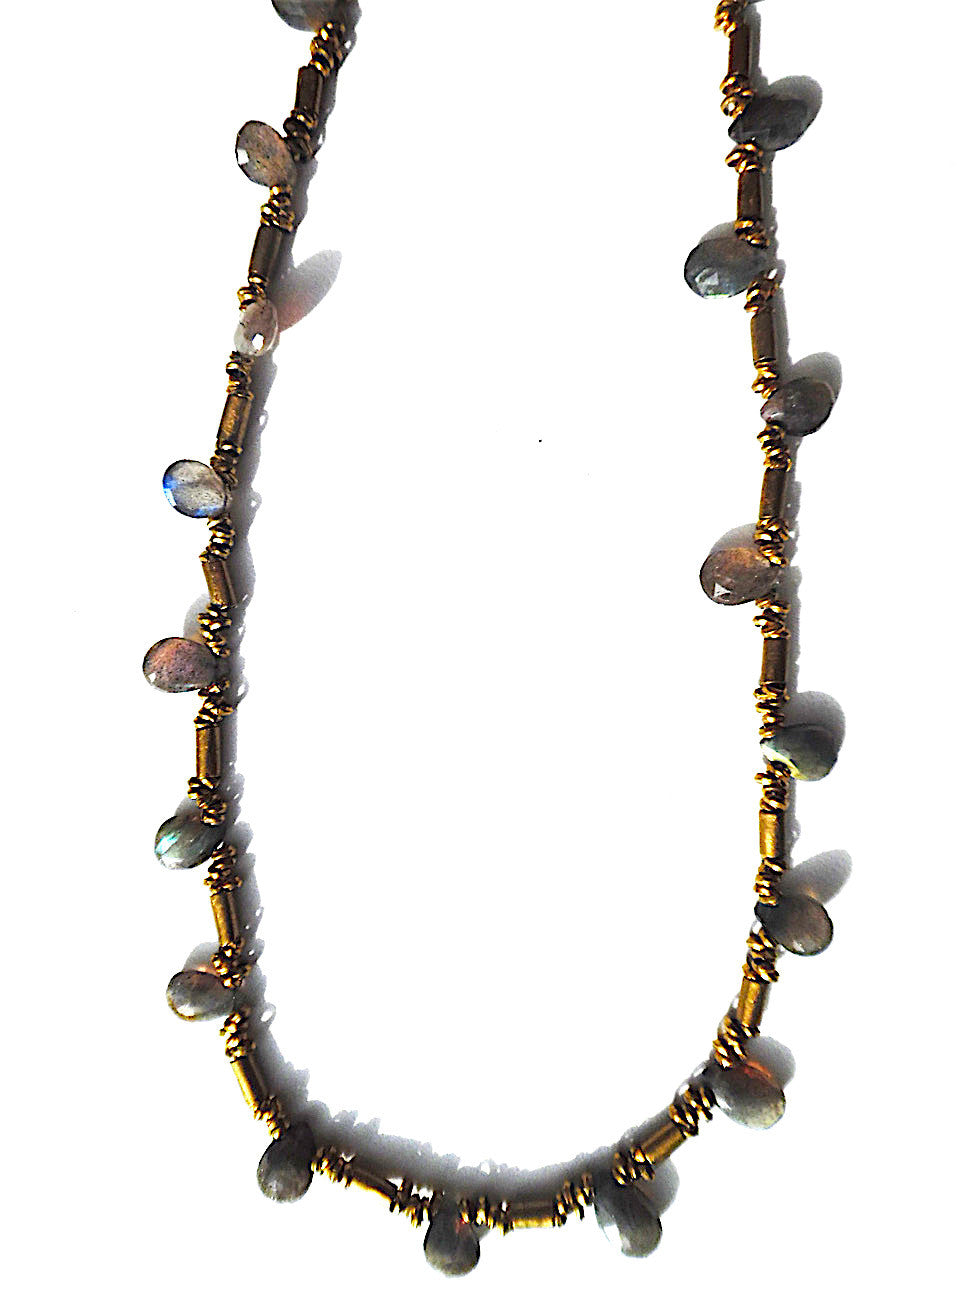 Necklace Labradorite Briolet and African Gold on Brass